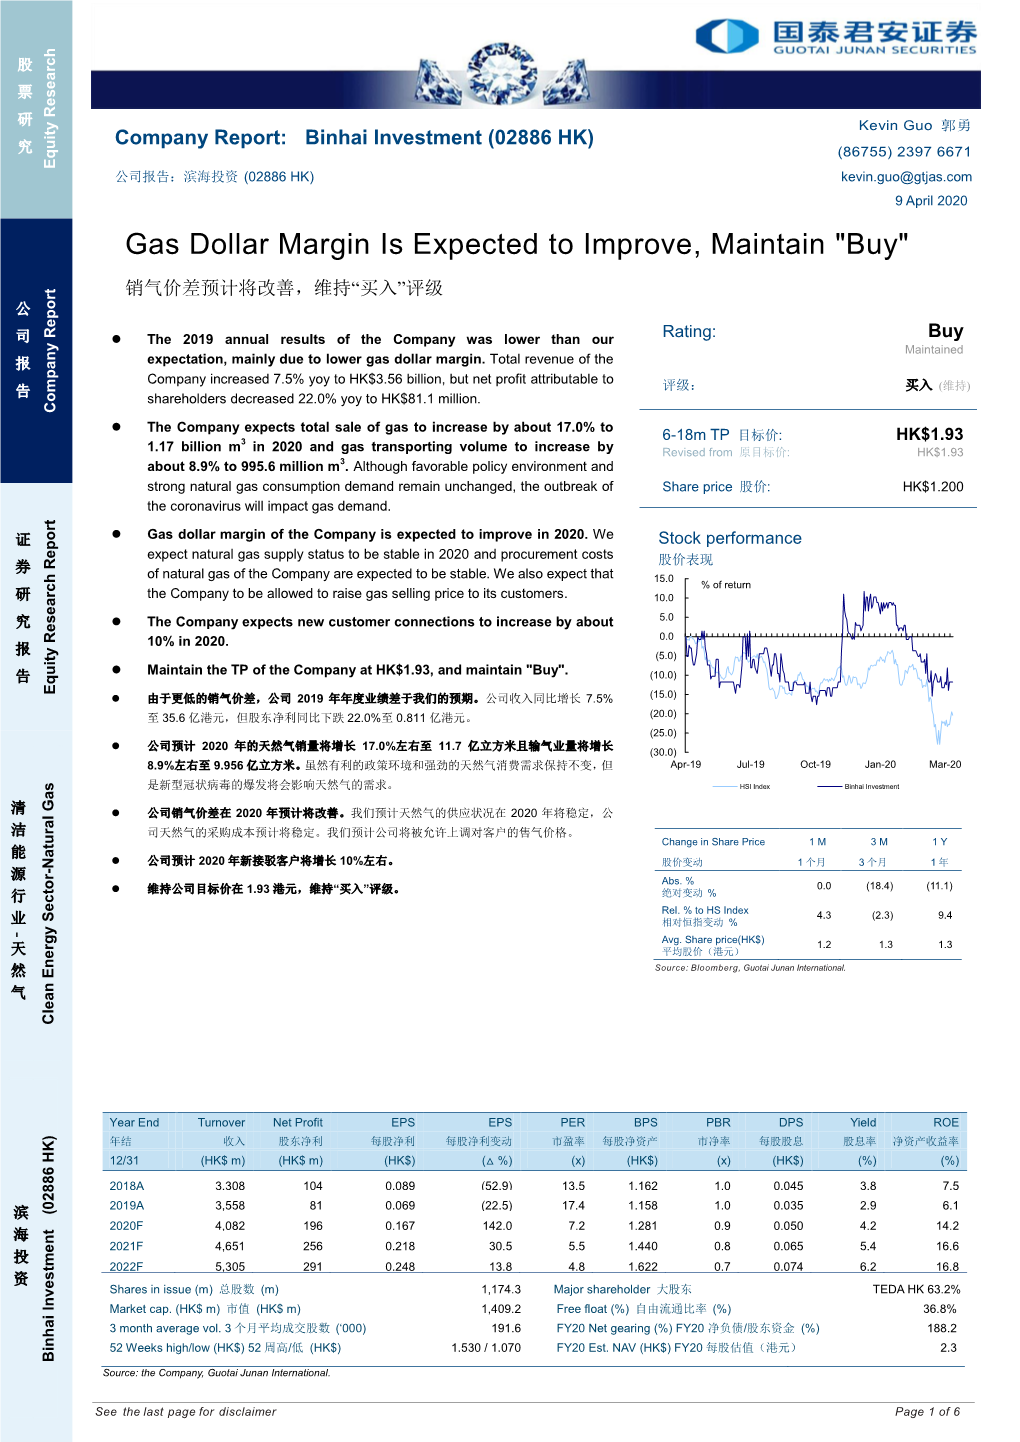 Gas Dollar Margin Is Expected to Improve, Maintain "Buy"